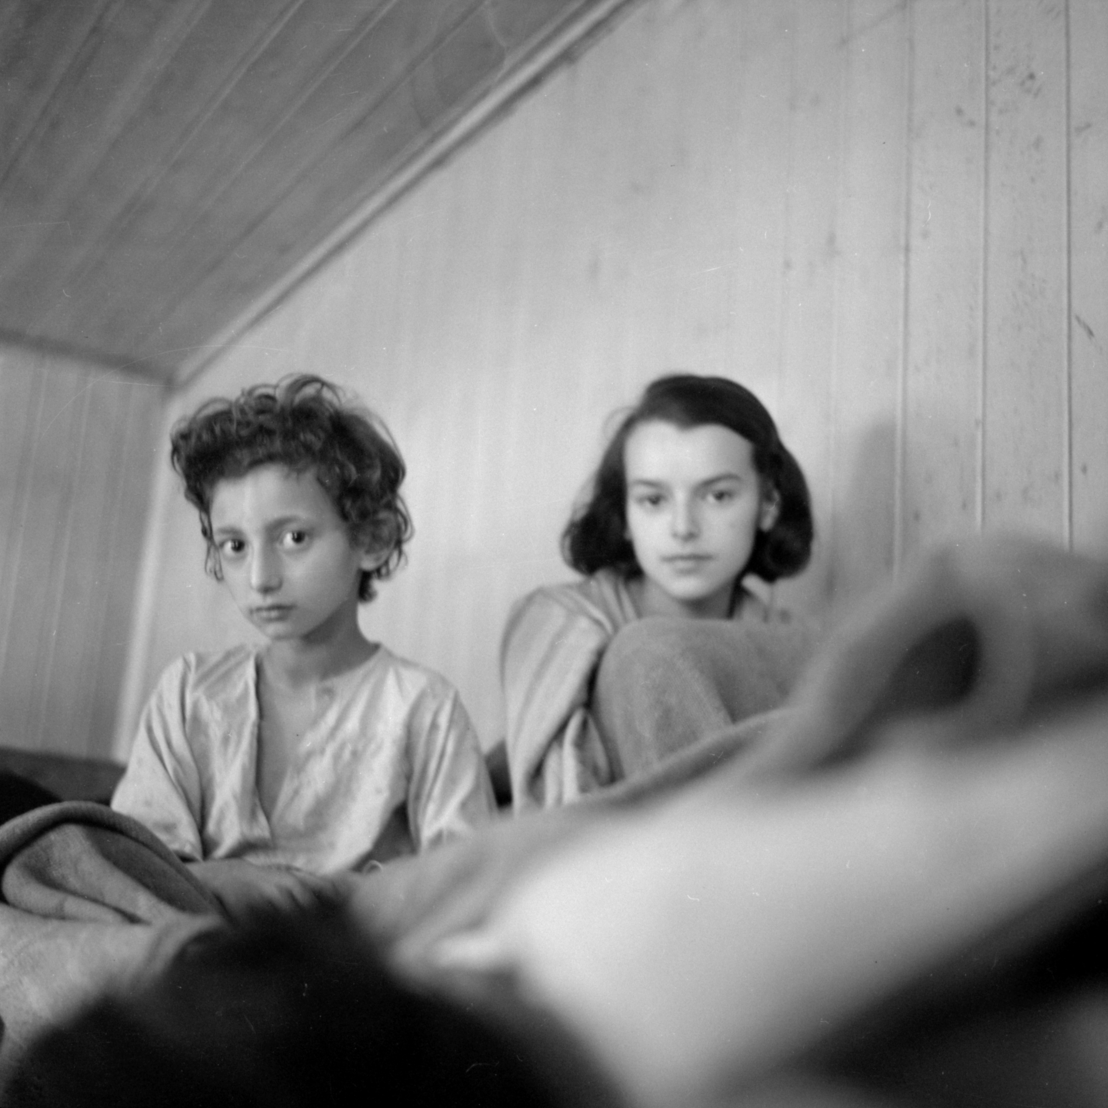 Survivors in a hut in the camp, 20 April 1945. Photo by Sgt. Oakes. Imperial War Museum, London, Photograph Archive, BU 4103.